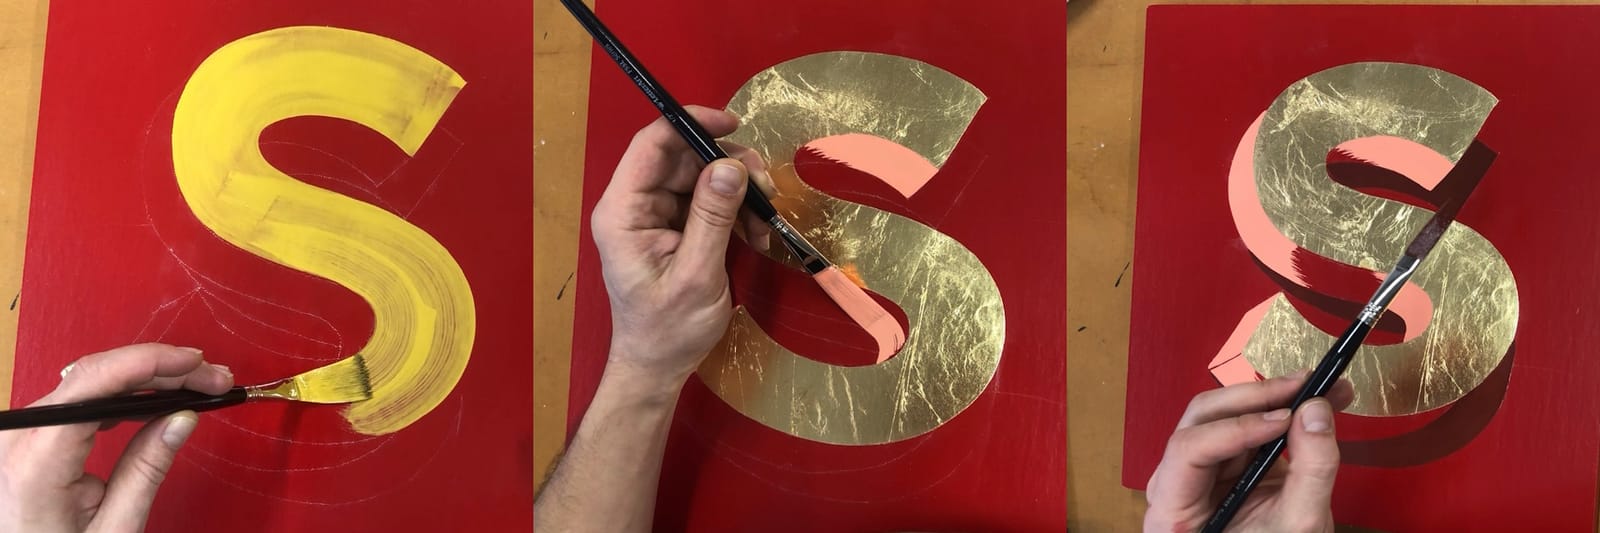 Triptych showing three stages of gilding and painting a sans-serif letter 'S'.